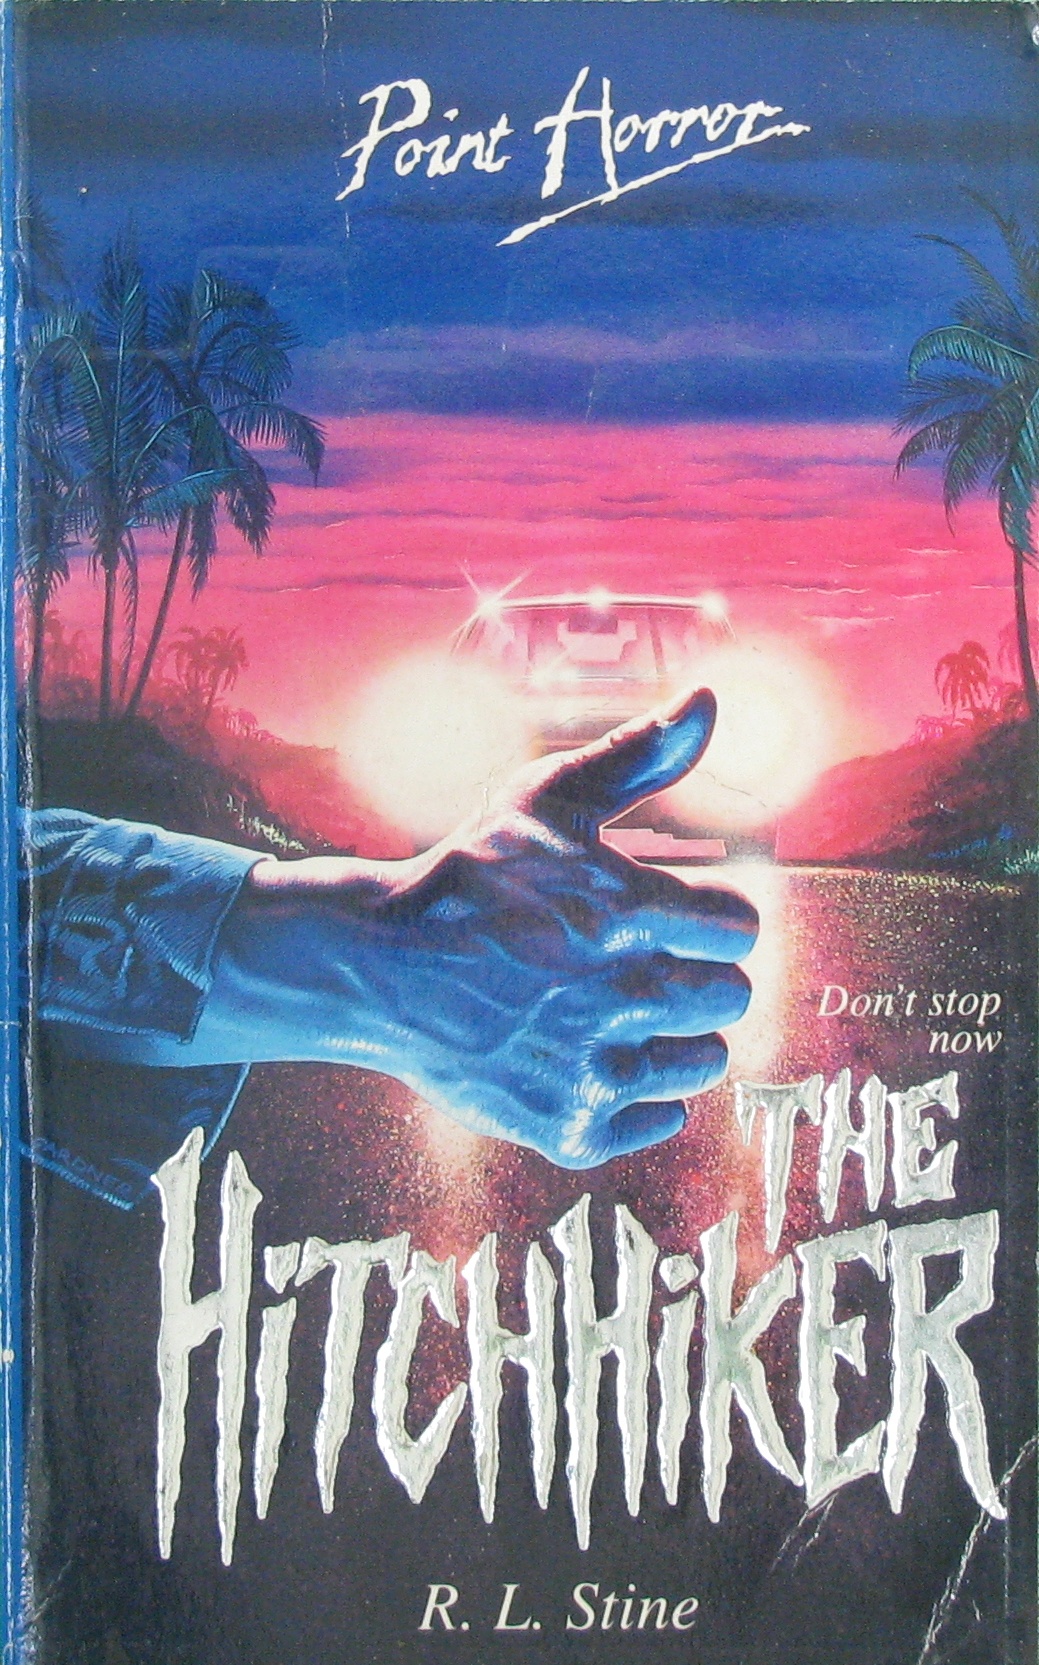 Escape from the Carnival of Horrors by R.L. Stine